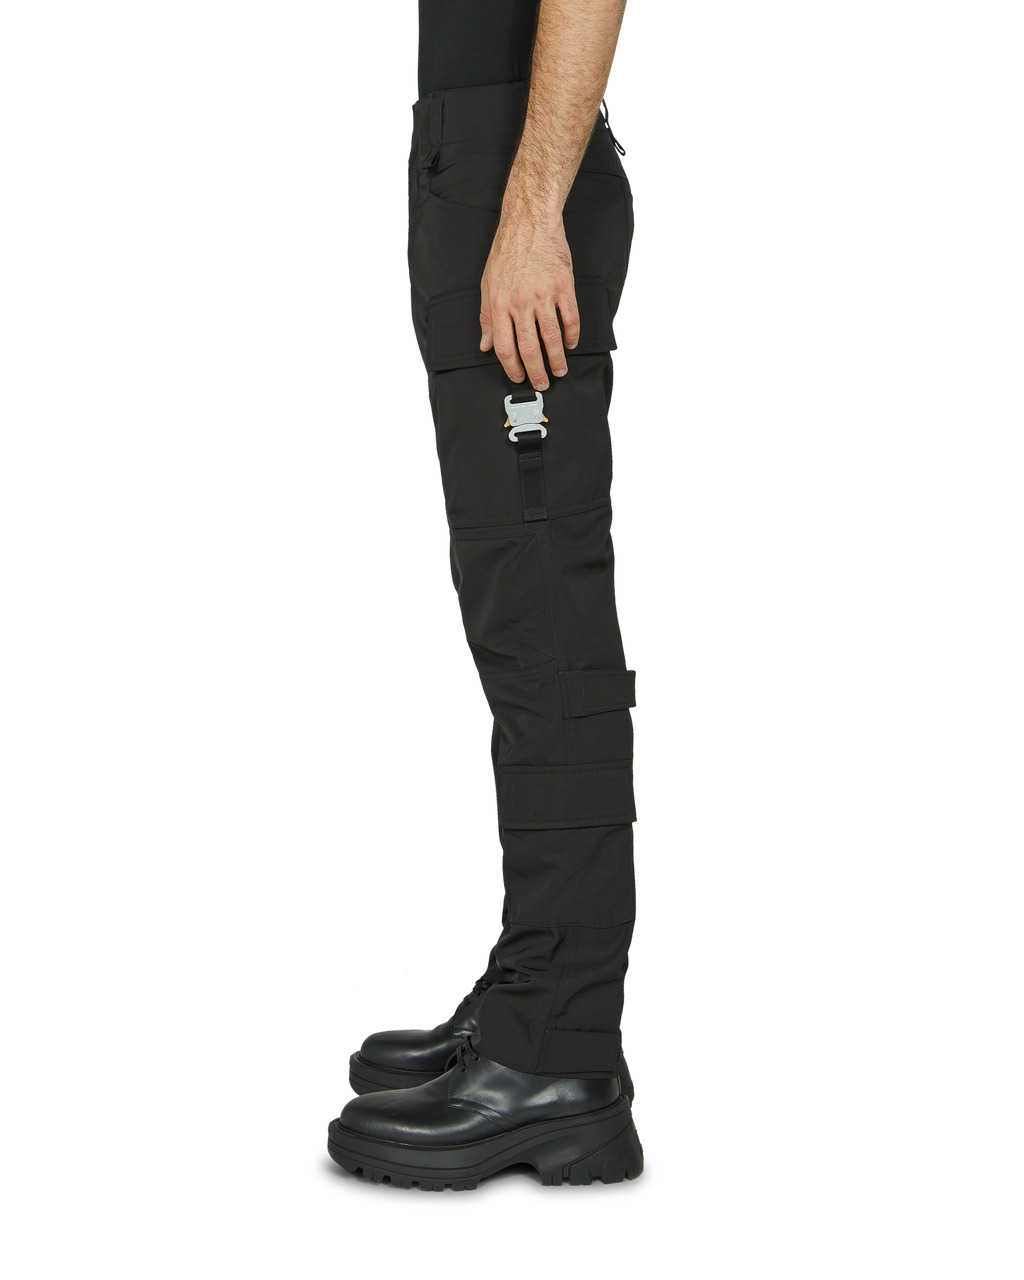 TACTICAL PANT WITH BUCKLE - 3